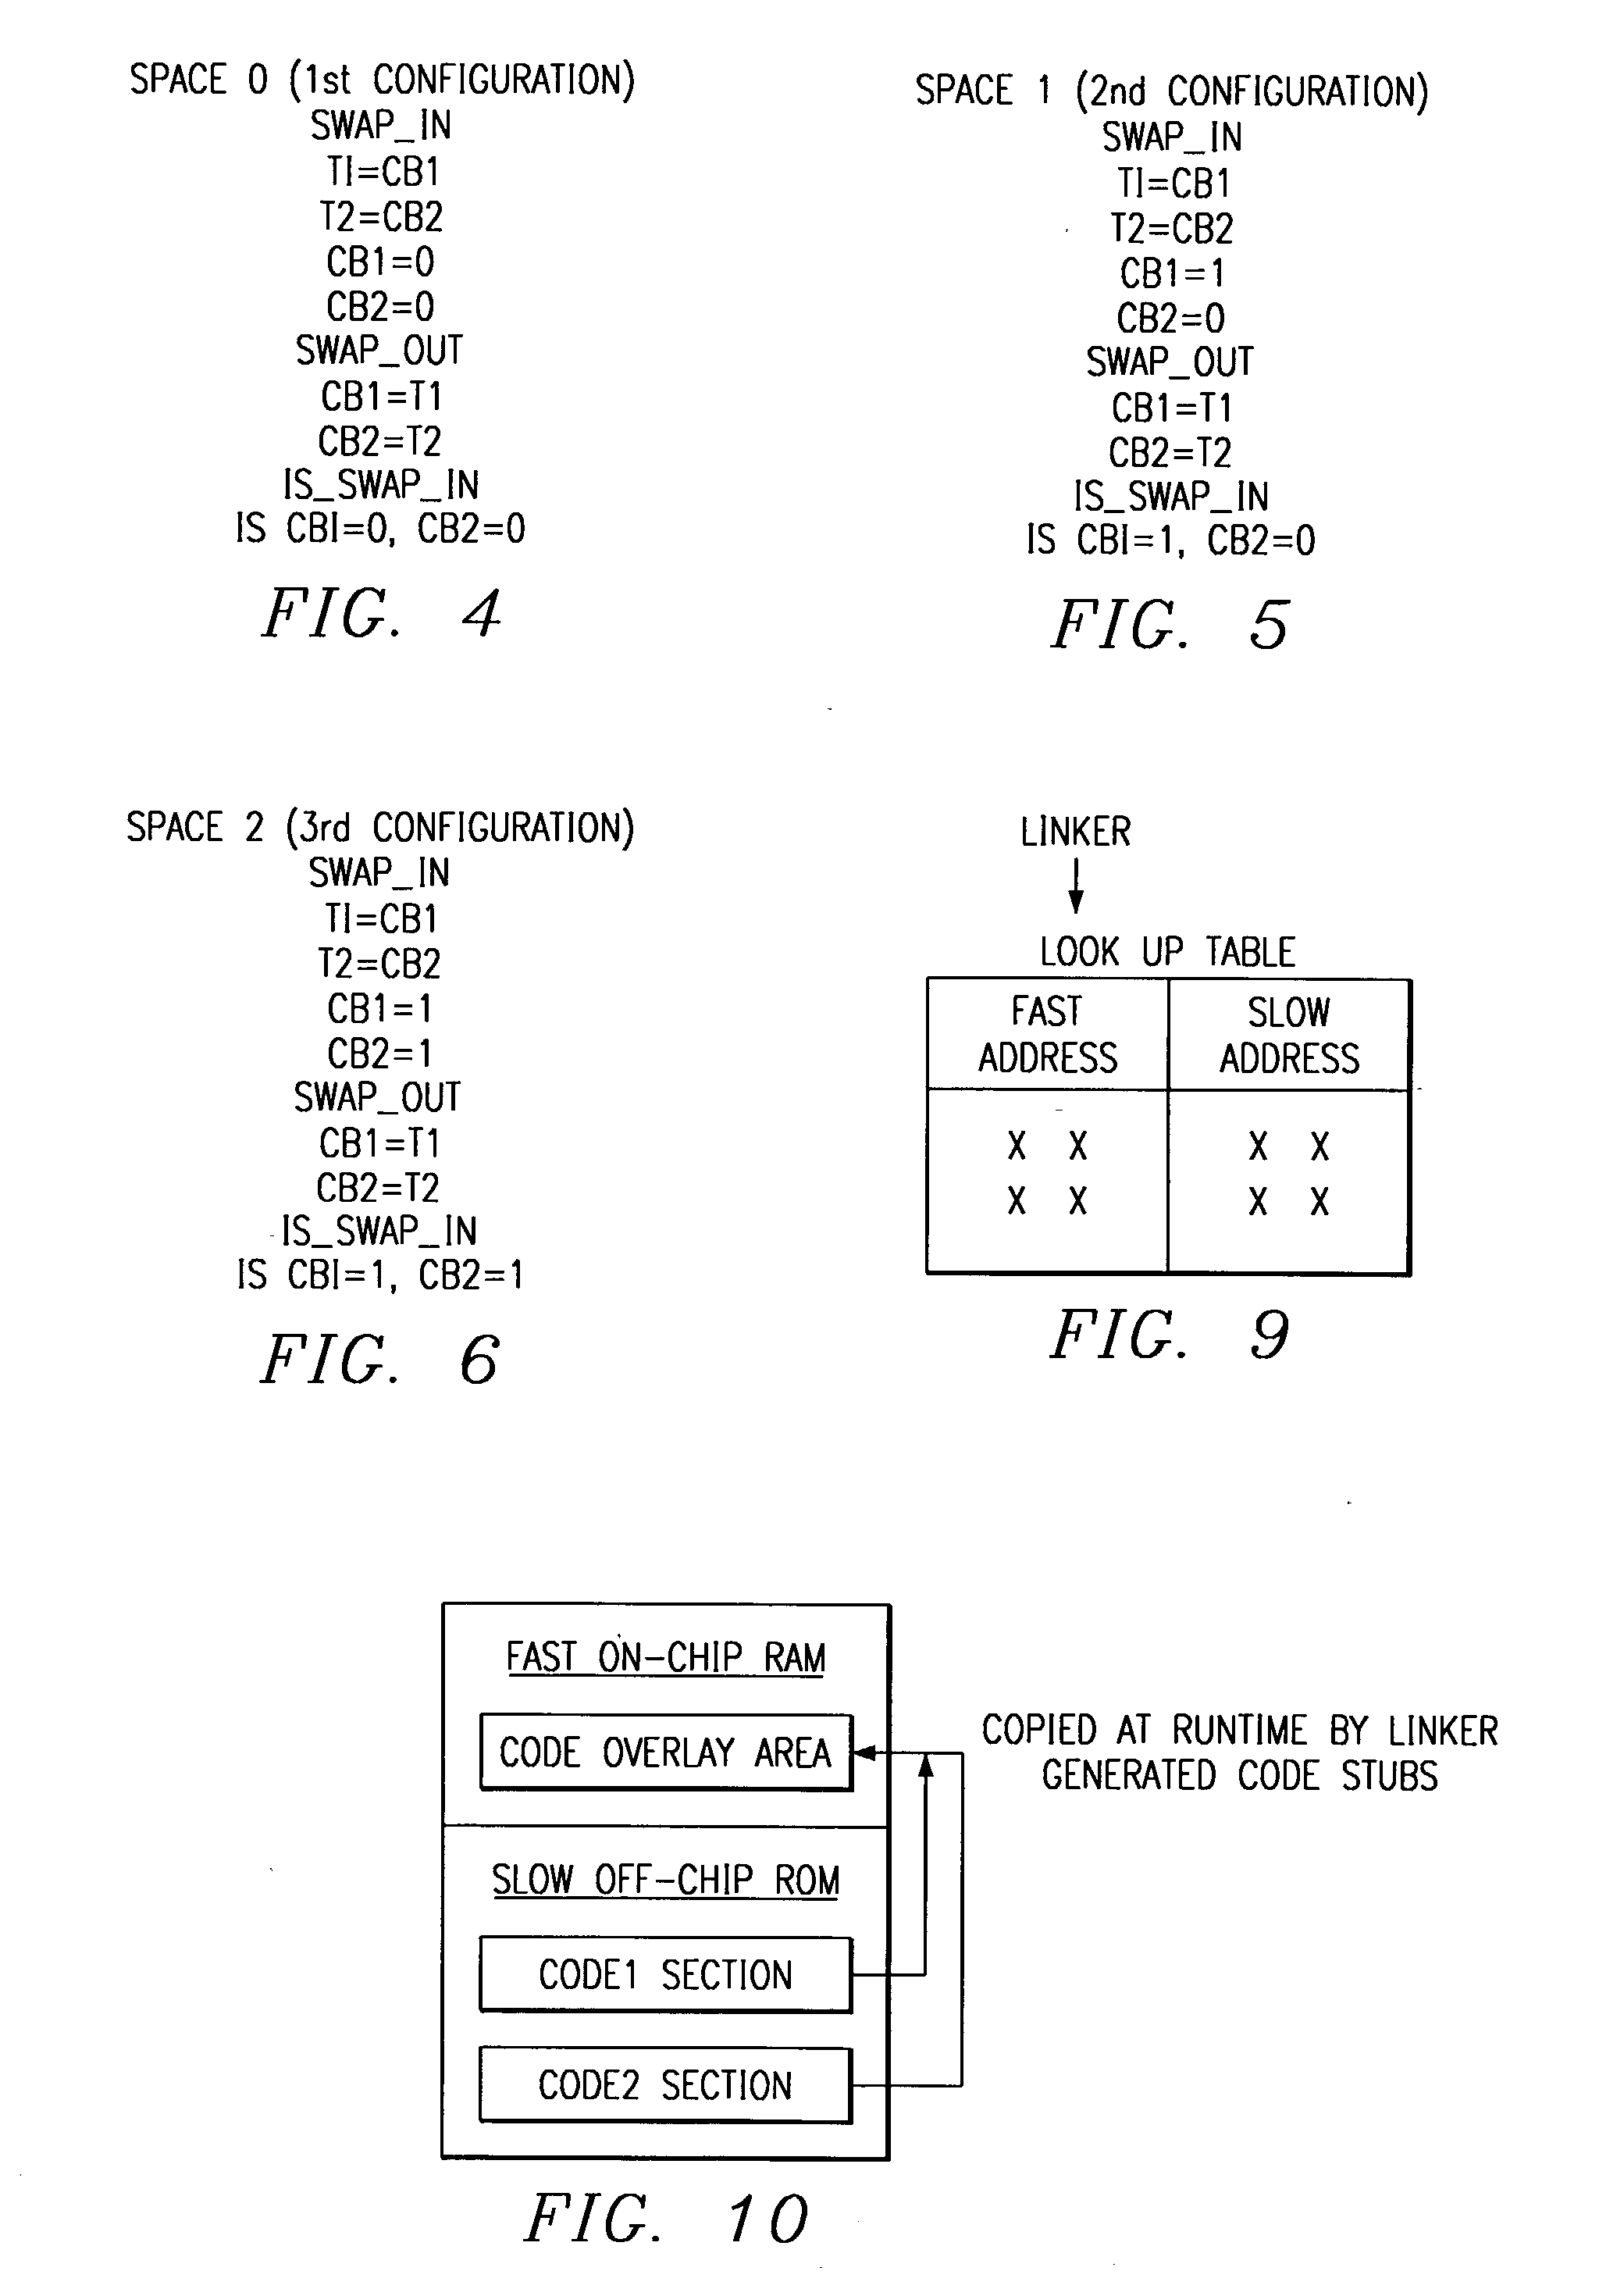 Linking of applications into devices having overlays and shadow memories